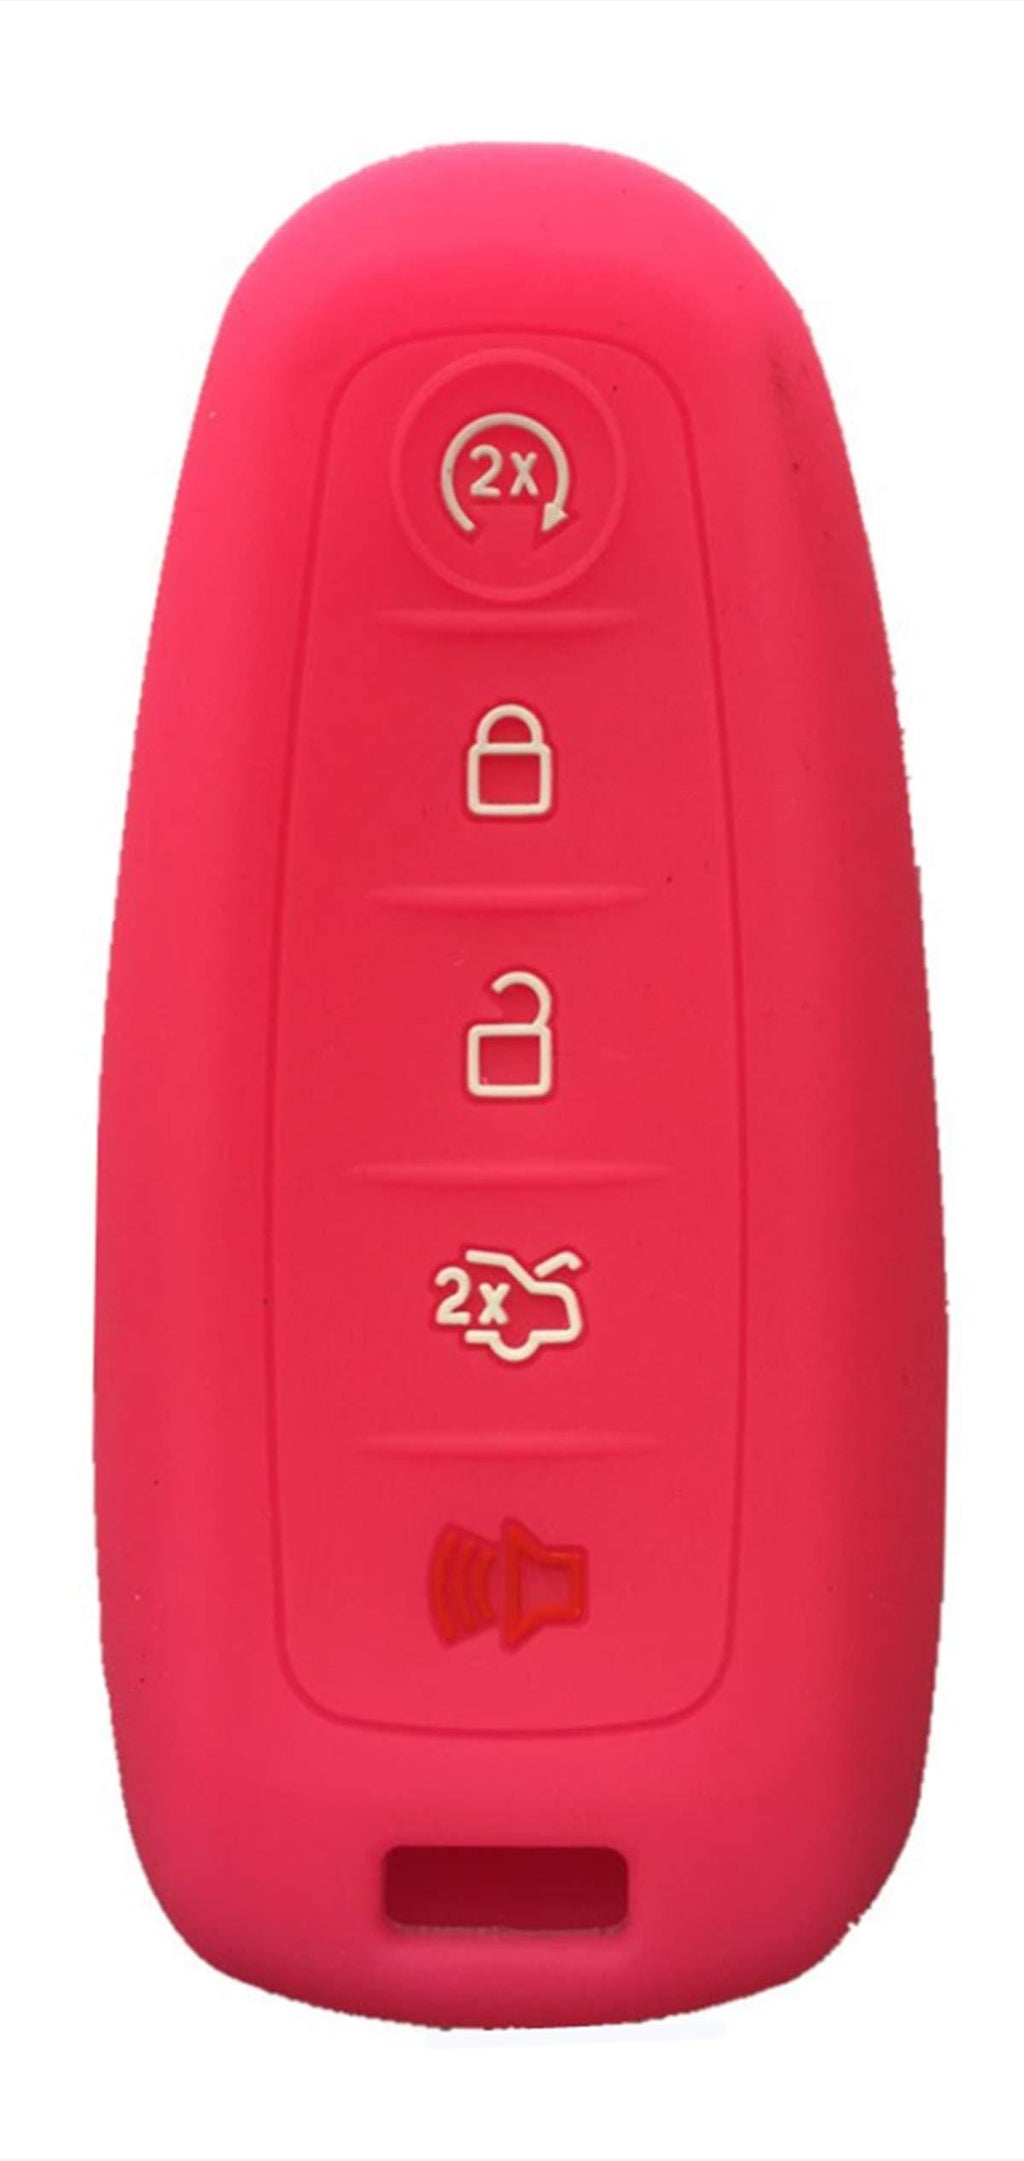  [AUSTRALIA] - KAWIHEN Silicone Key Fob Cover Protector Smart Remote Control Keyless Entry Key Fob Case Holder Cover For Ford C-Max Edge Escape Expedition Explorer Flex Focus Taurus M3N5WY8609 (Rose Bengal)